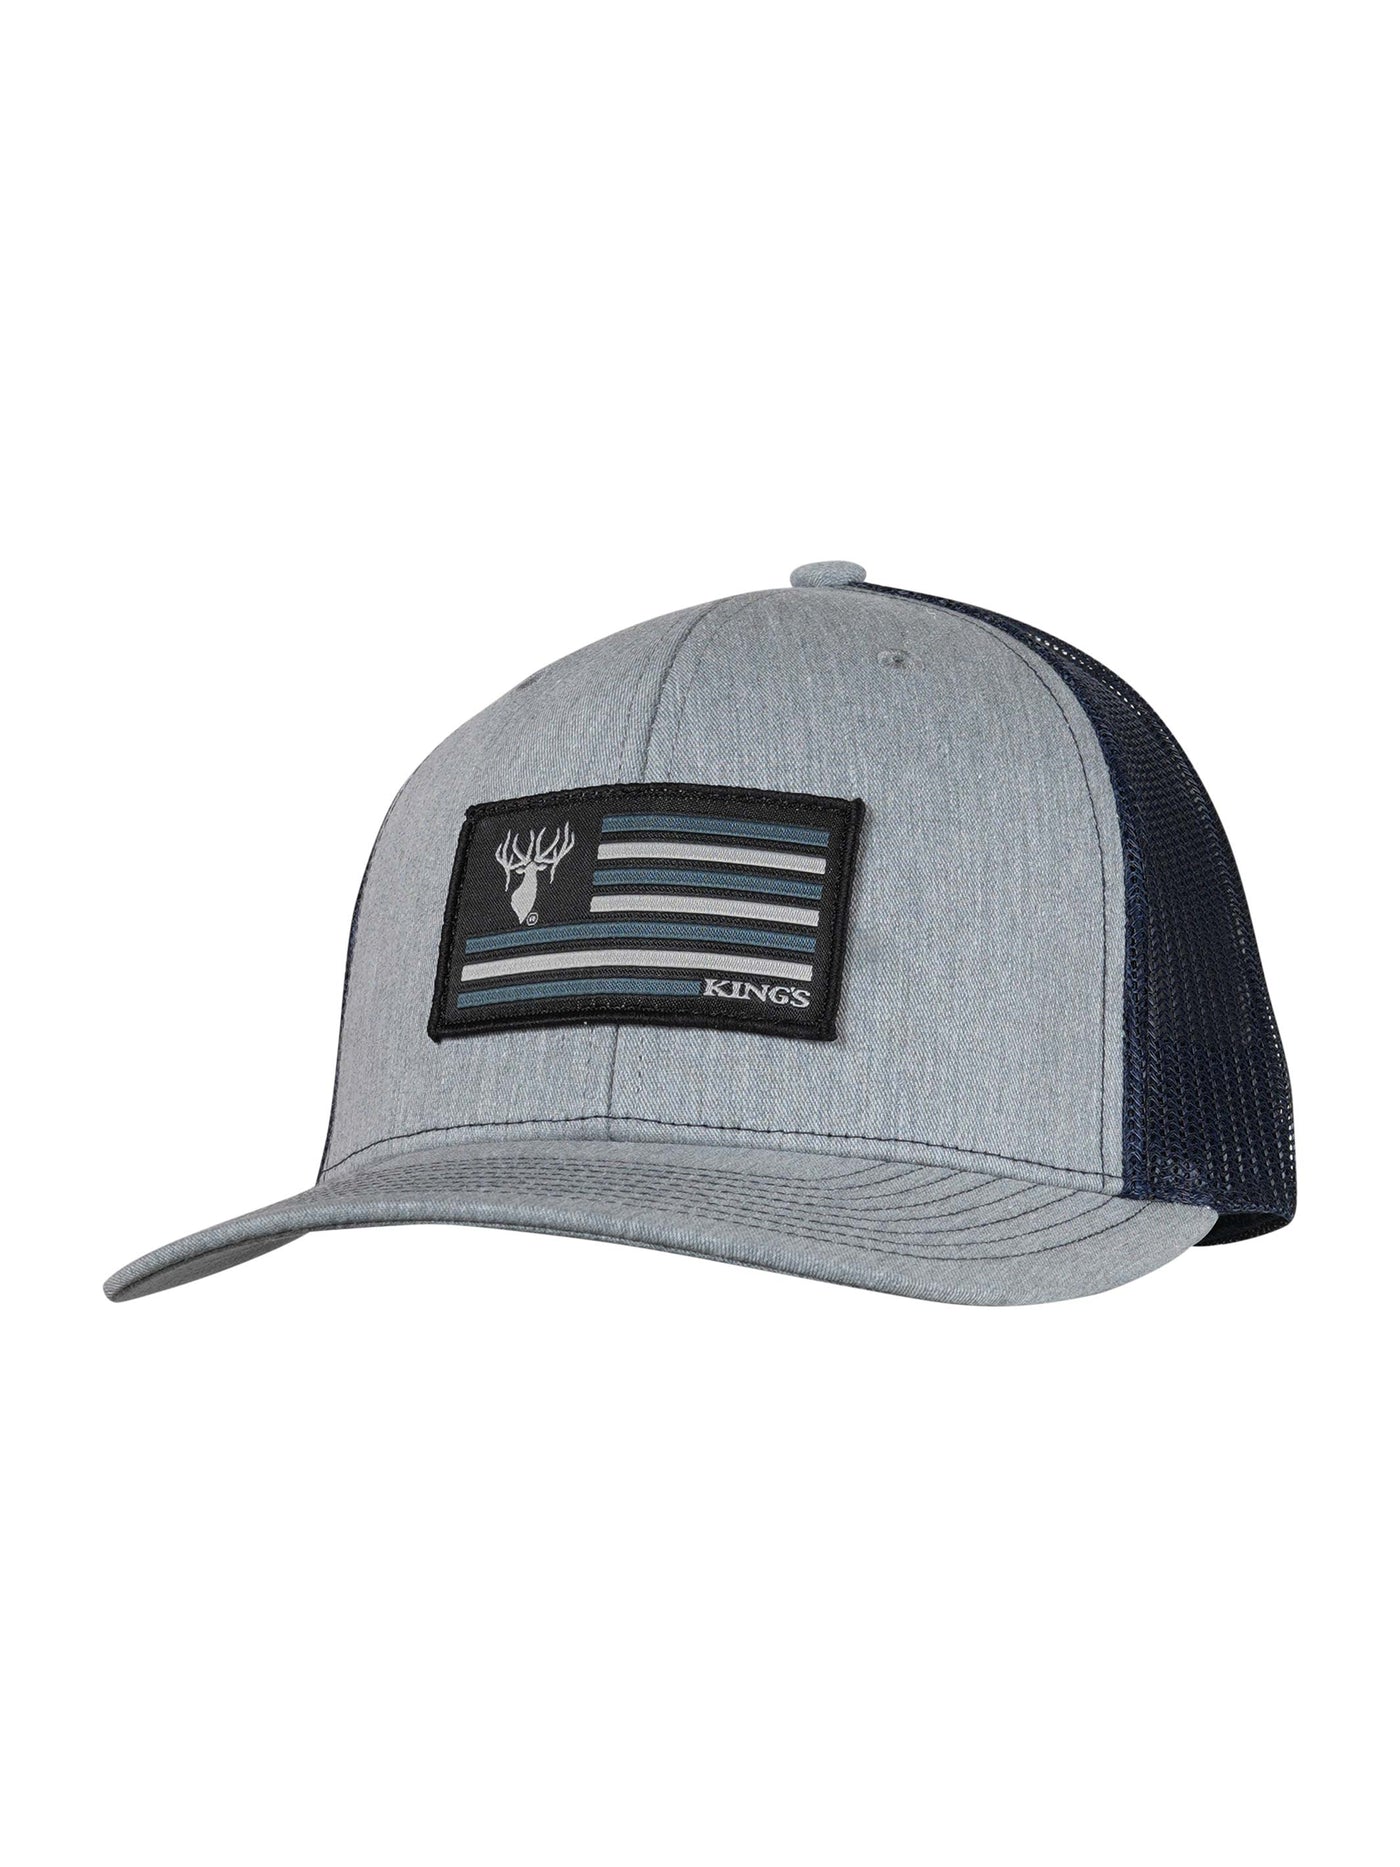 King's Flag Patch Hat | Corbotras lochi